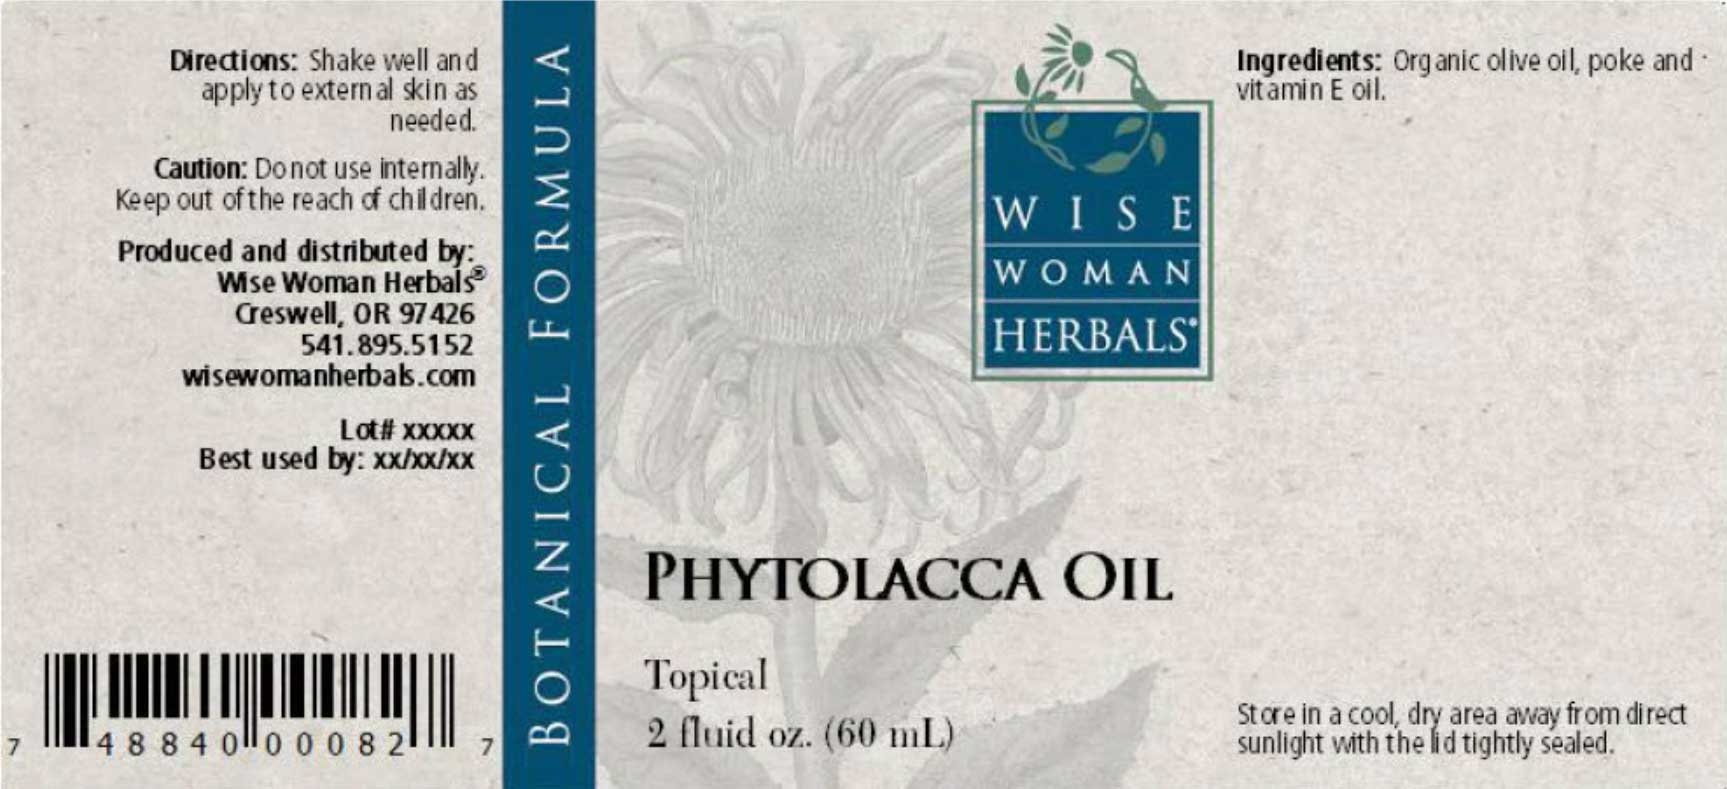 Wise Woman Herbals Phytolacca Oil (Poke) Label